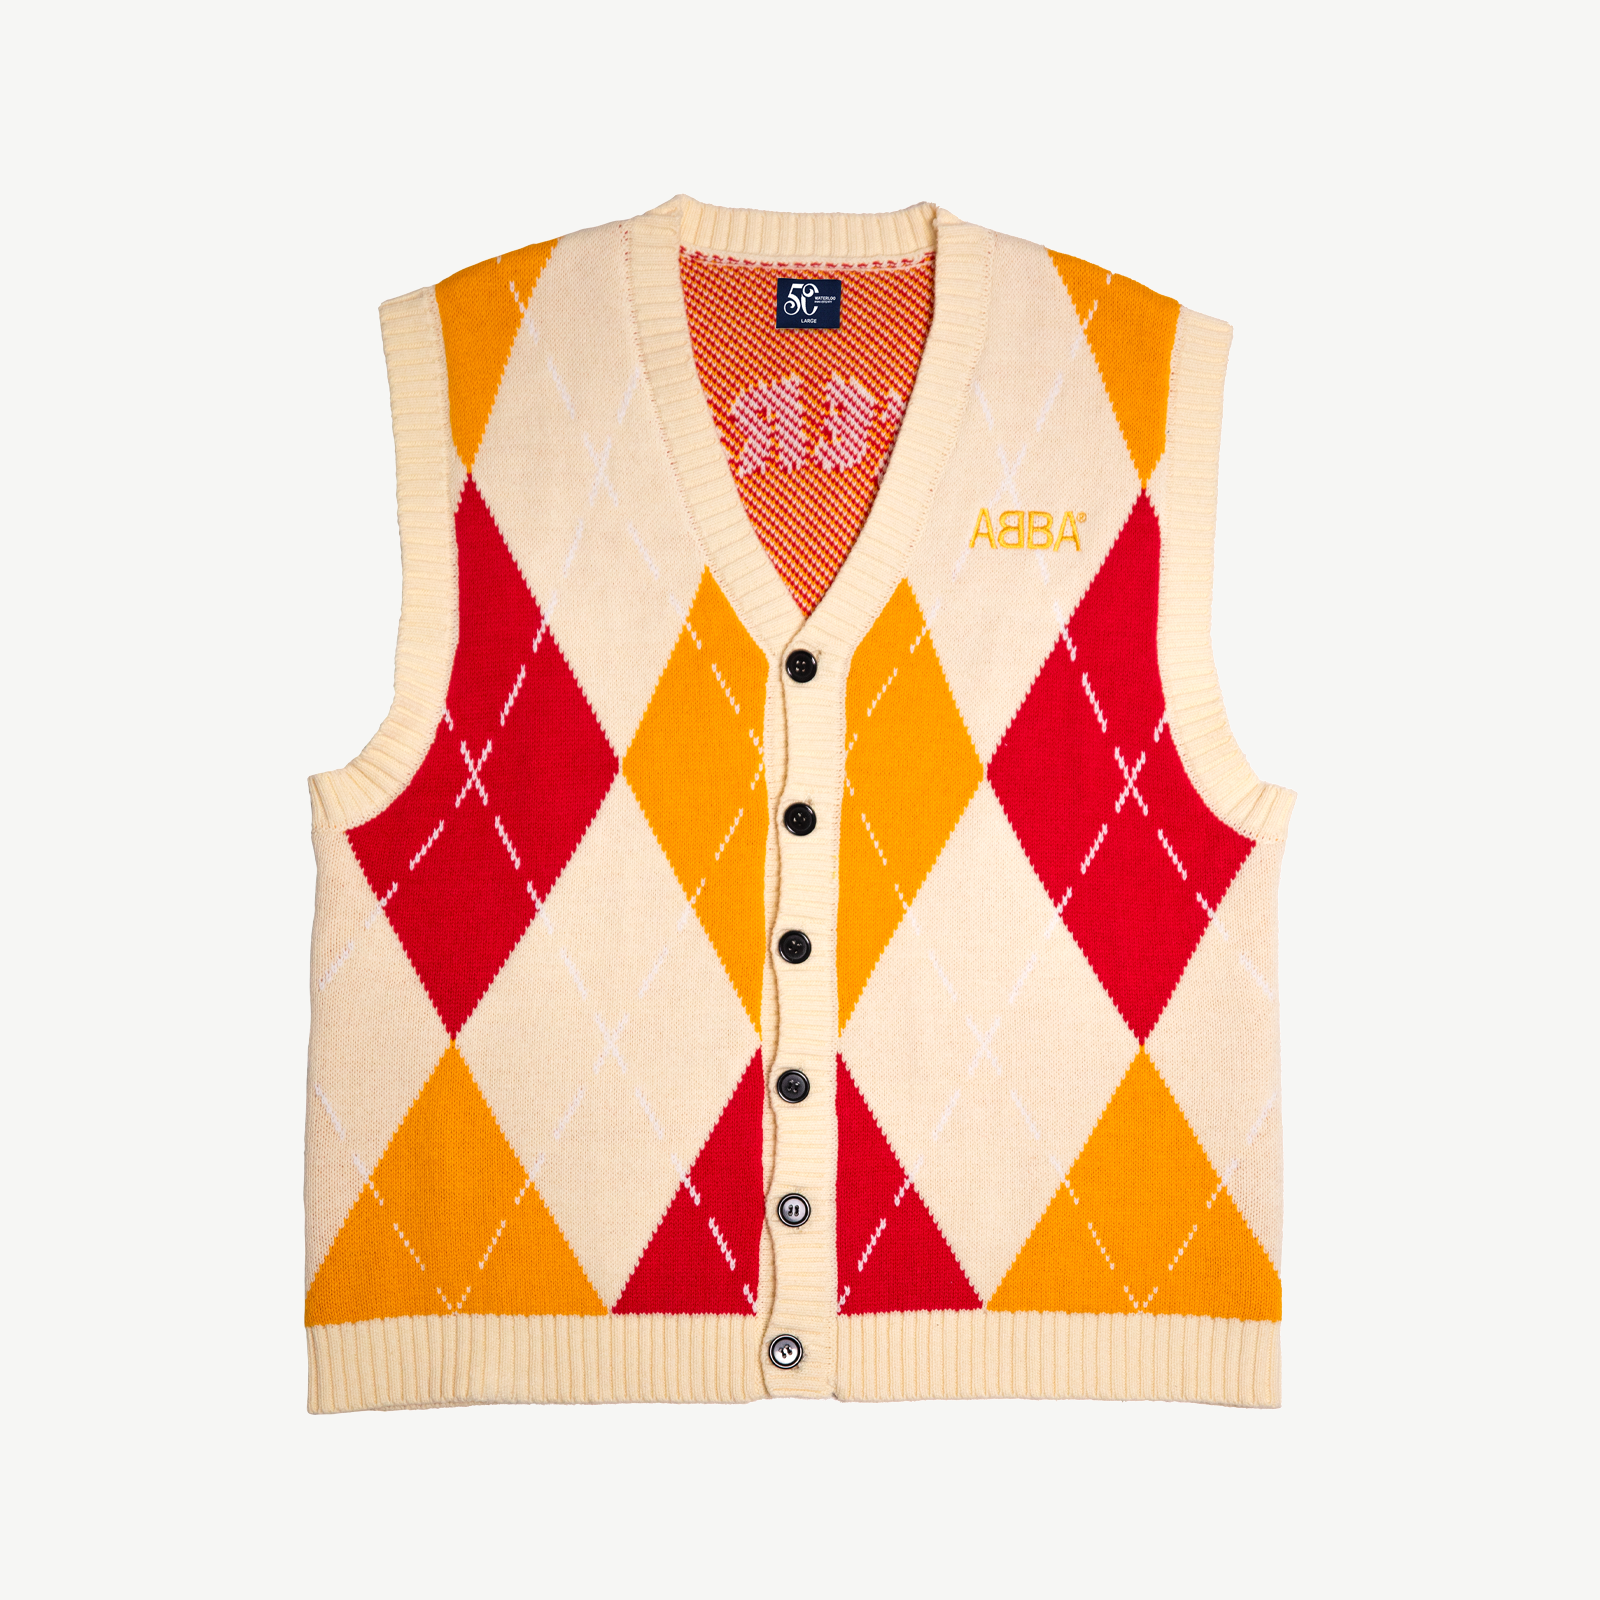 ABBA - Waterloo Knitted Vest